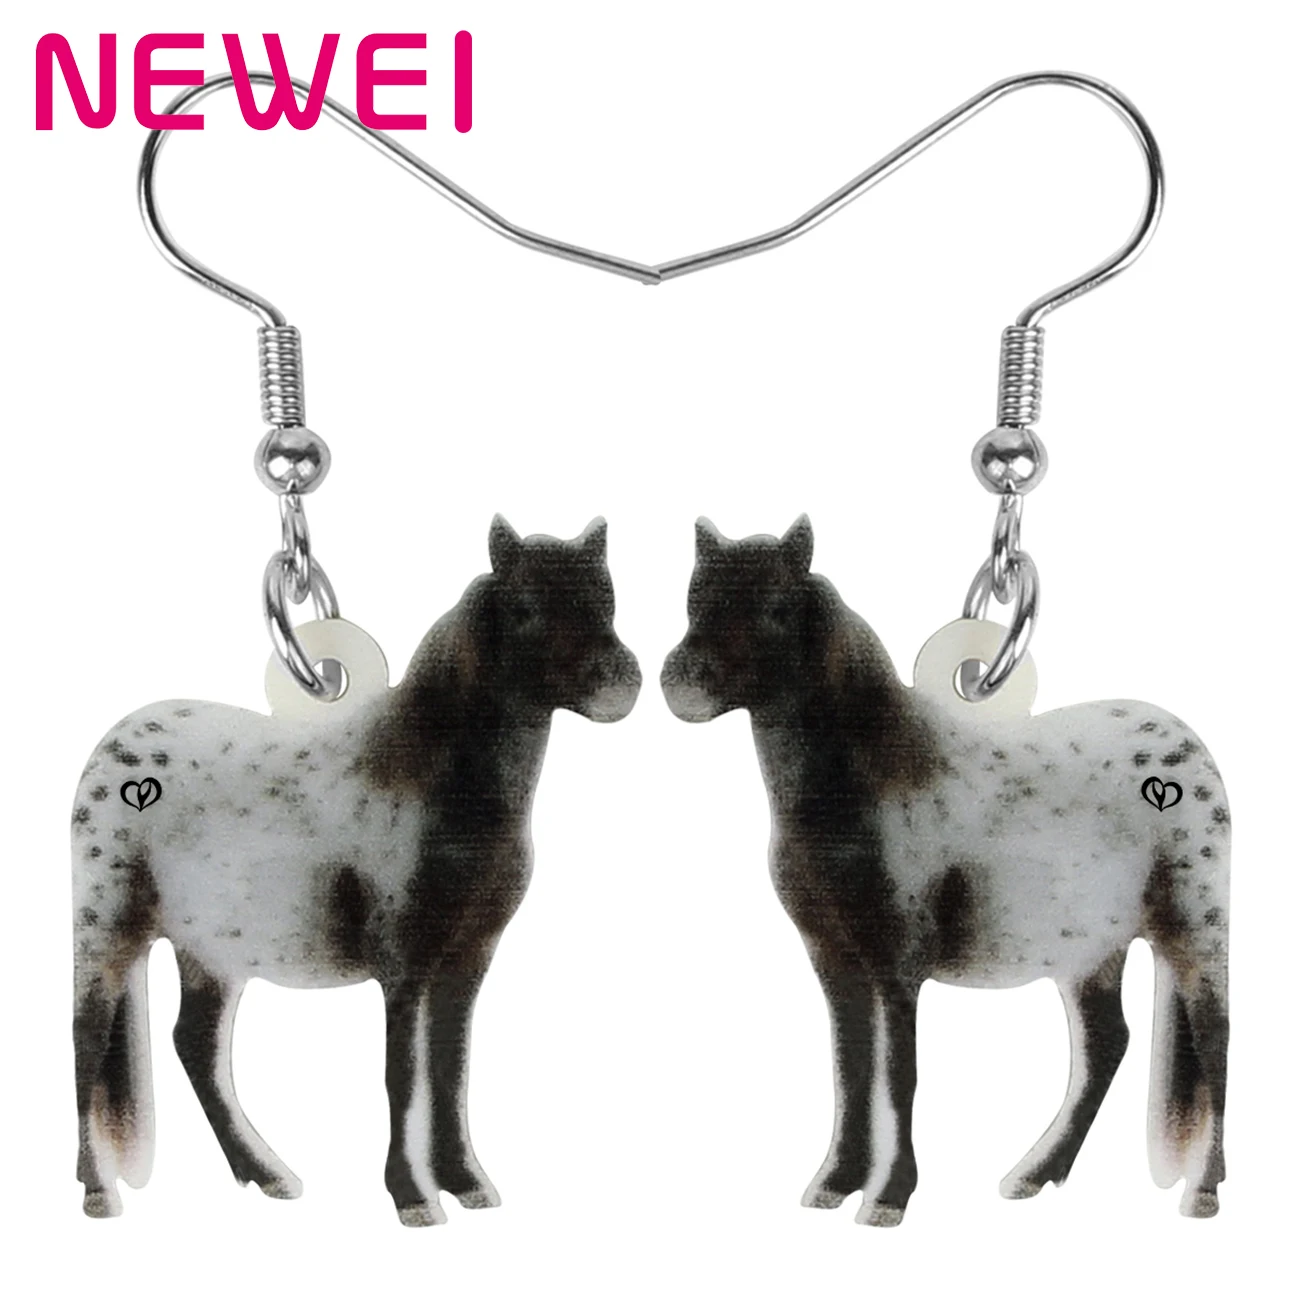 

Bonsny Acrylic Standing Cute Horse Earrings Anime Farm Animal Dangle Drop Jewelry For Women Lover Kids Novelty Gift Accessories